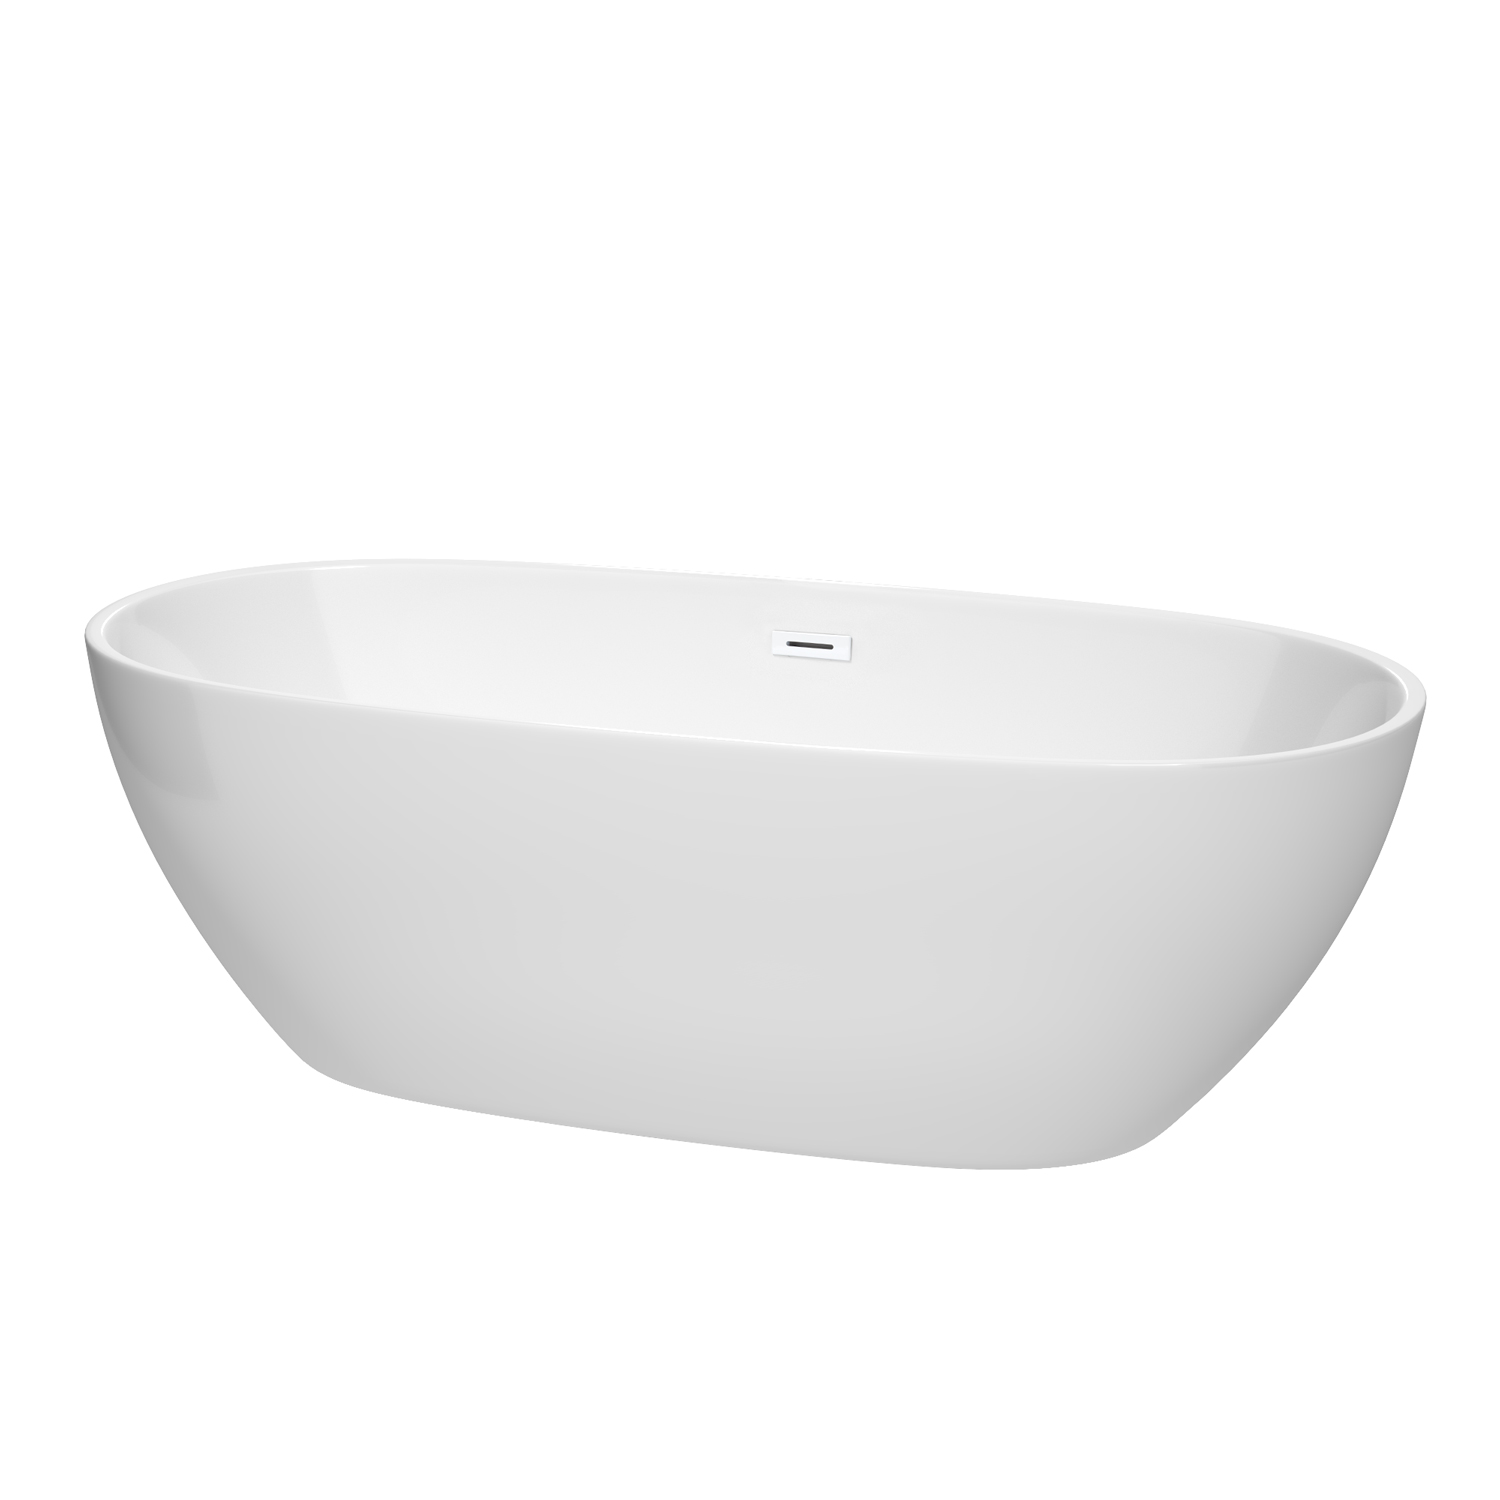 71" Freestanding Bathtub in White with Shiny White Pop-up Drain Finish and Overflow Trim 